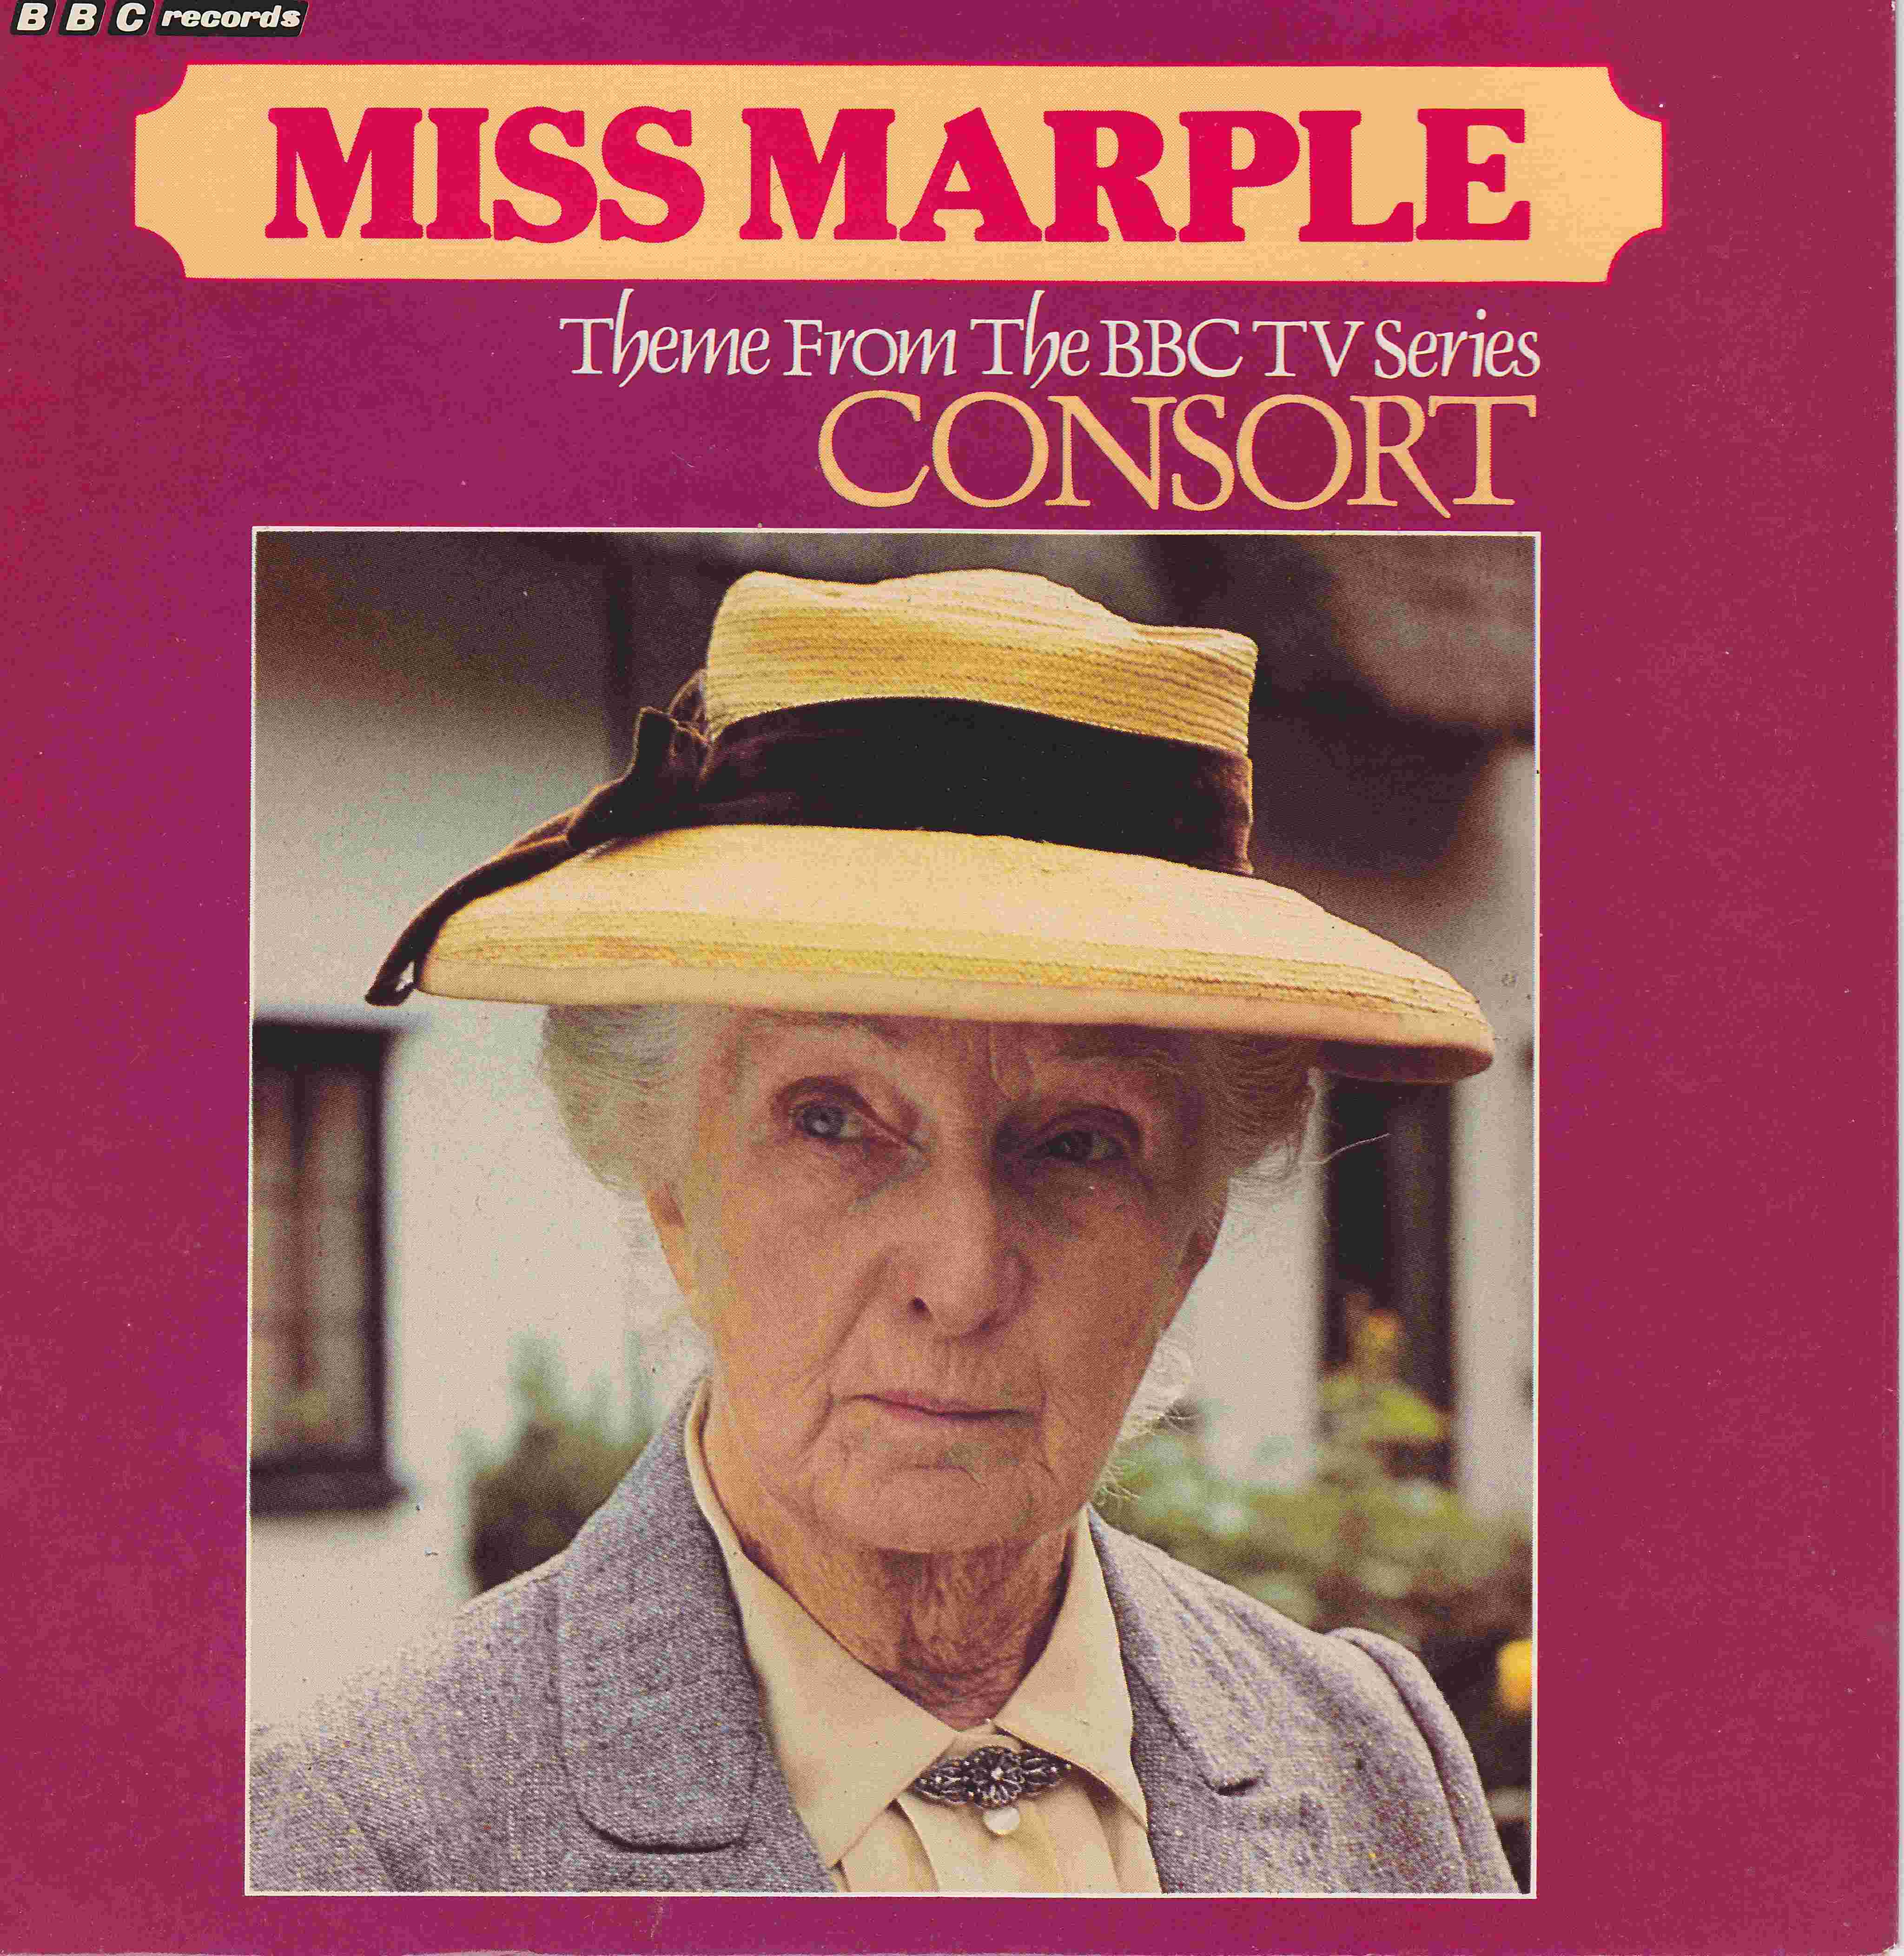 Picture of RESL 153 Miss Marple by artist Consort from the BBC singles - Records and Tapes library